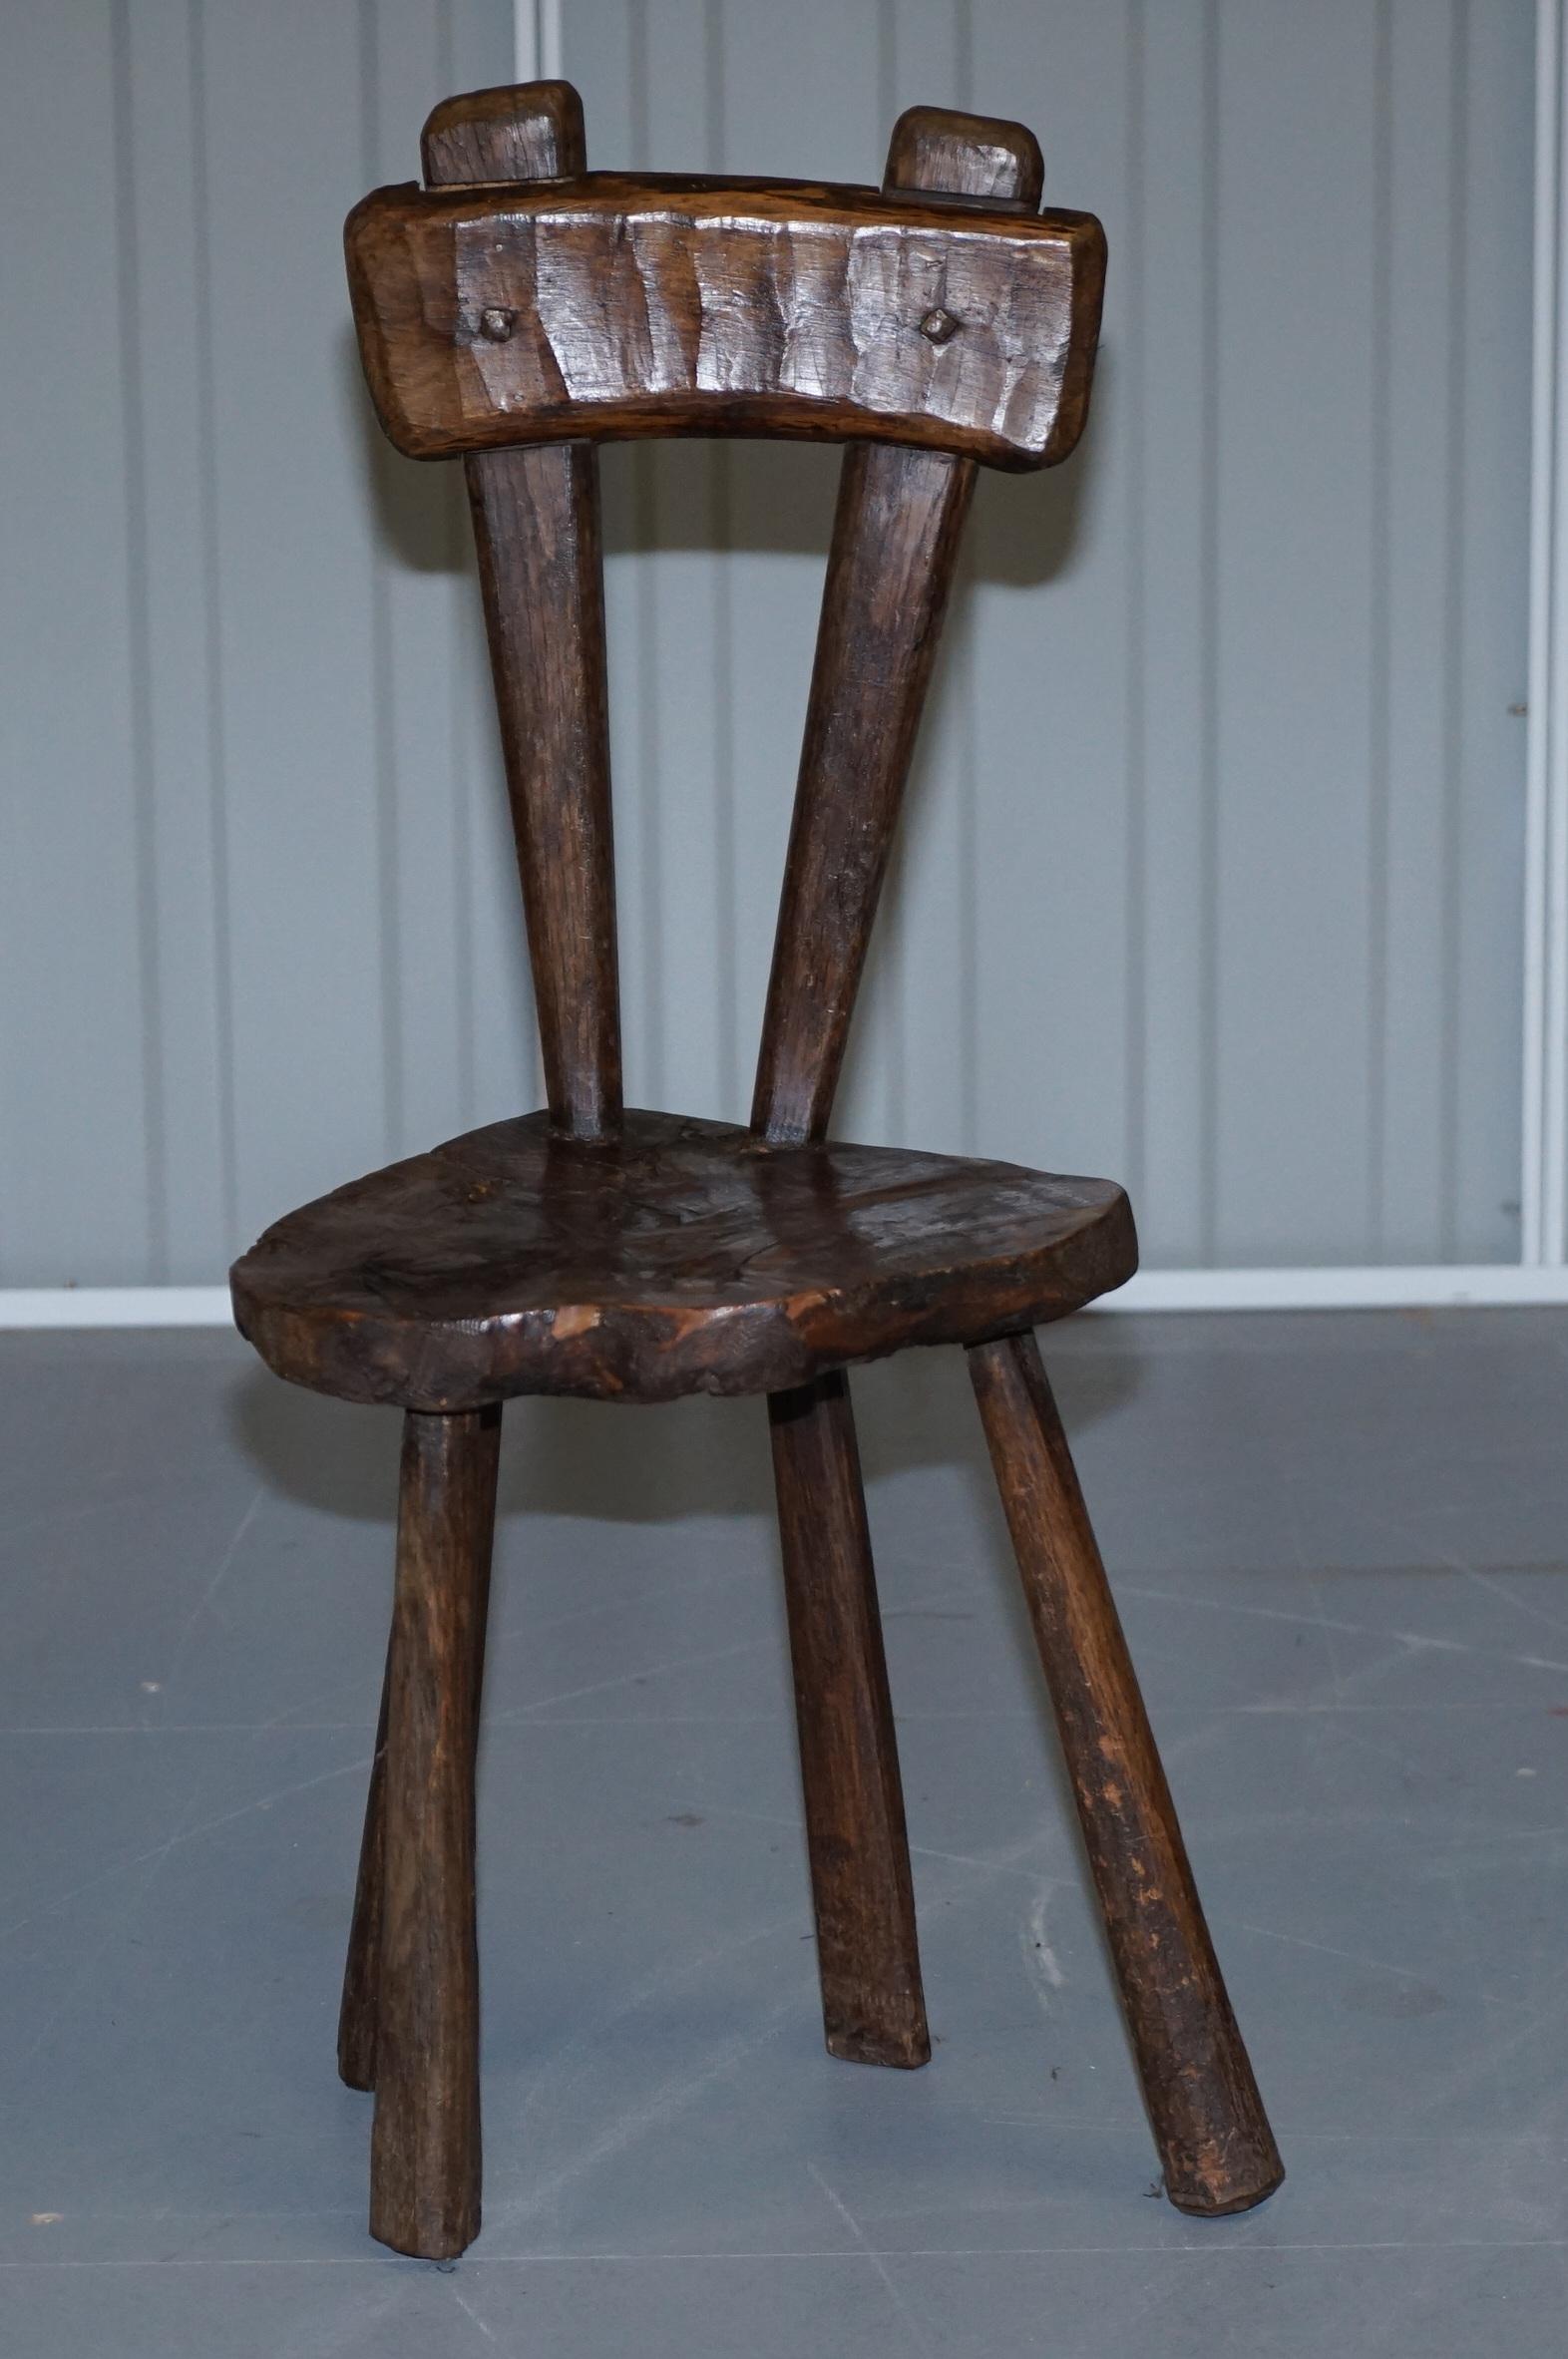 We are delighted to offer for sale this absolutely stunning circa 1780 Primate French milking or children’s chair in burr chestnut

What a stunning piece, the wood tells a thousands story’s, just look how its hand carved, warped from age and use,